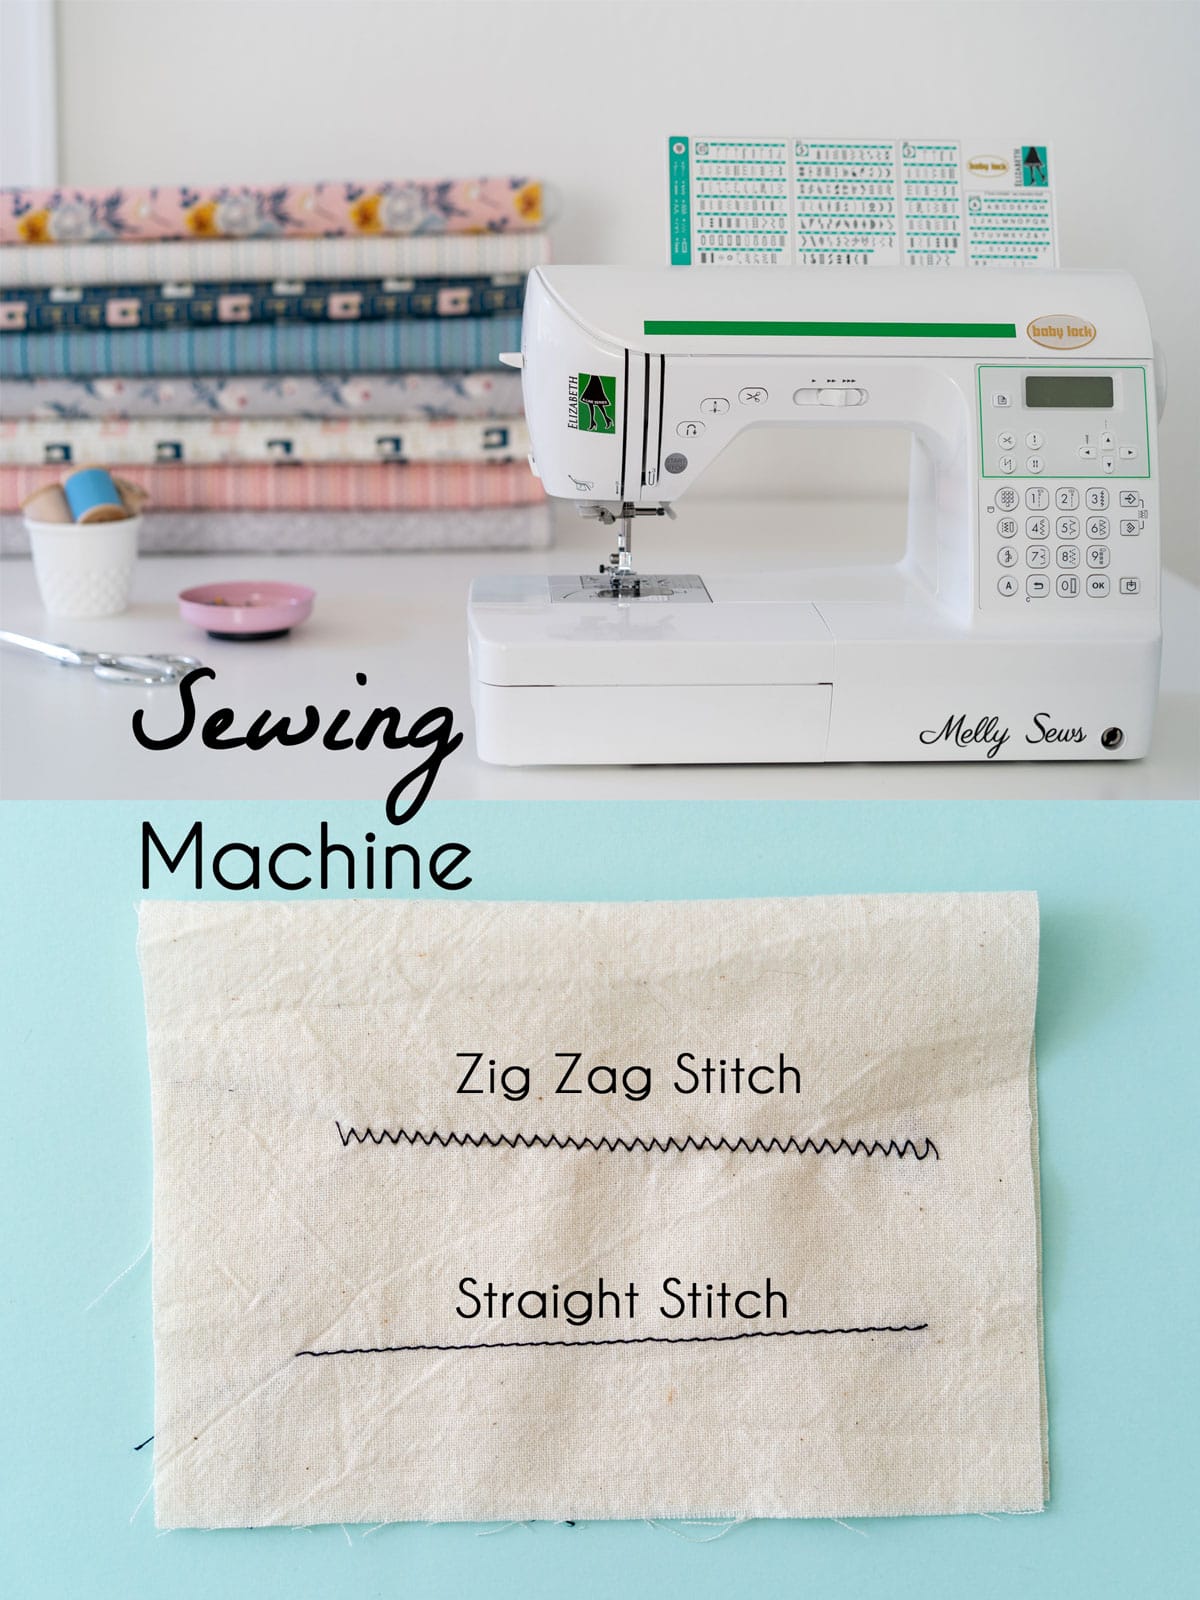 Sewing machine and example of stitches a sewing machine can do